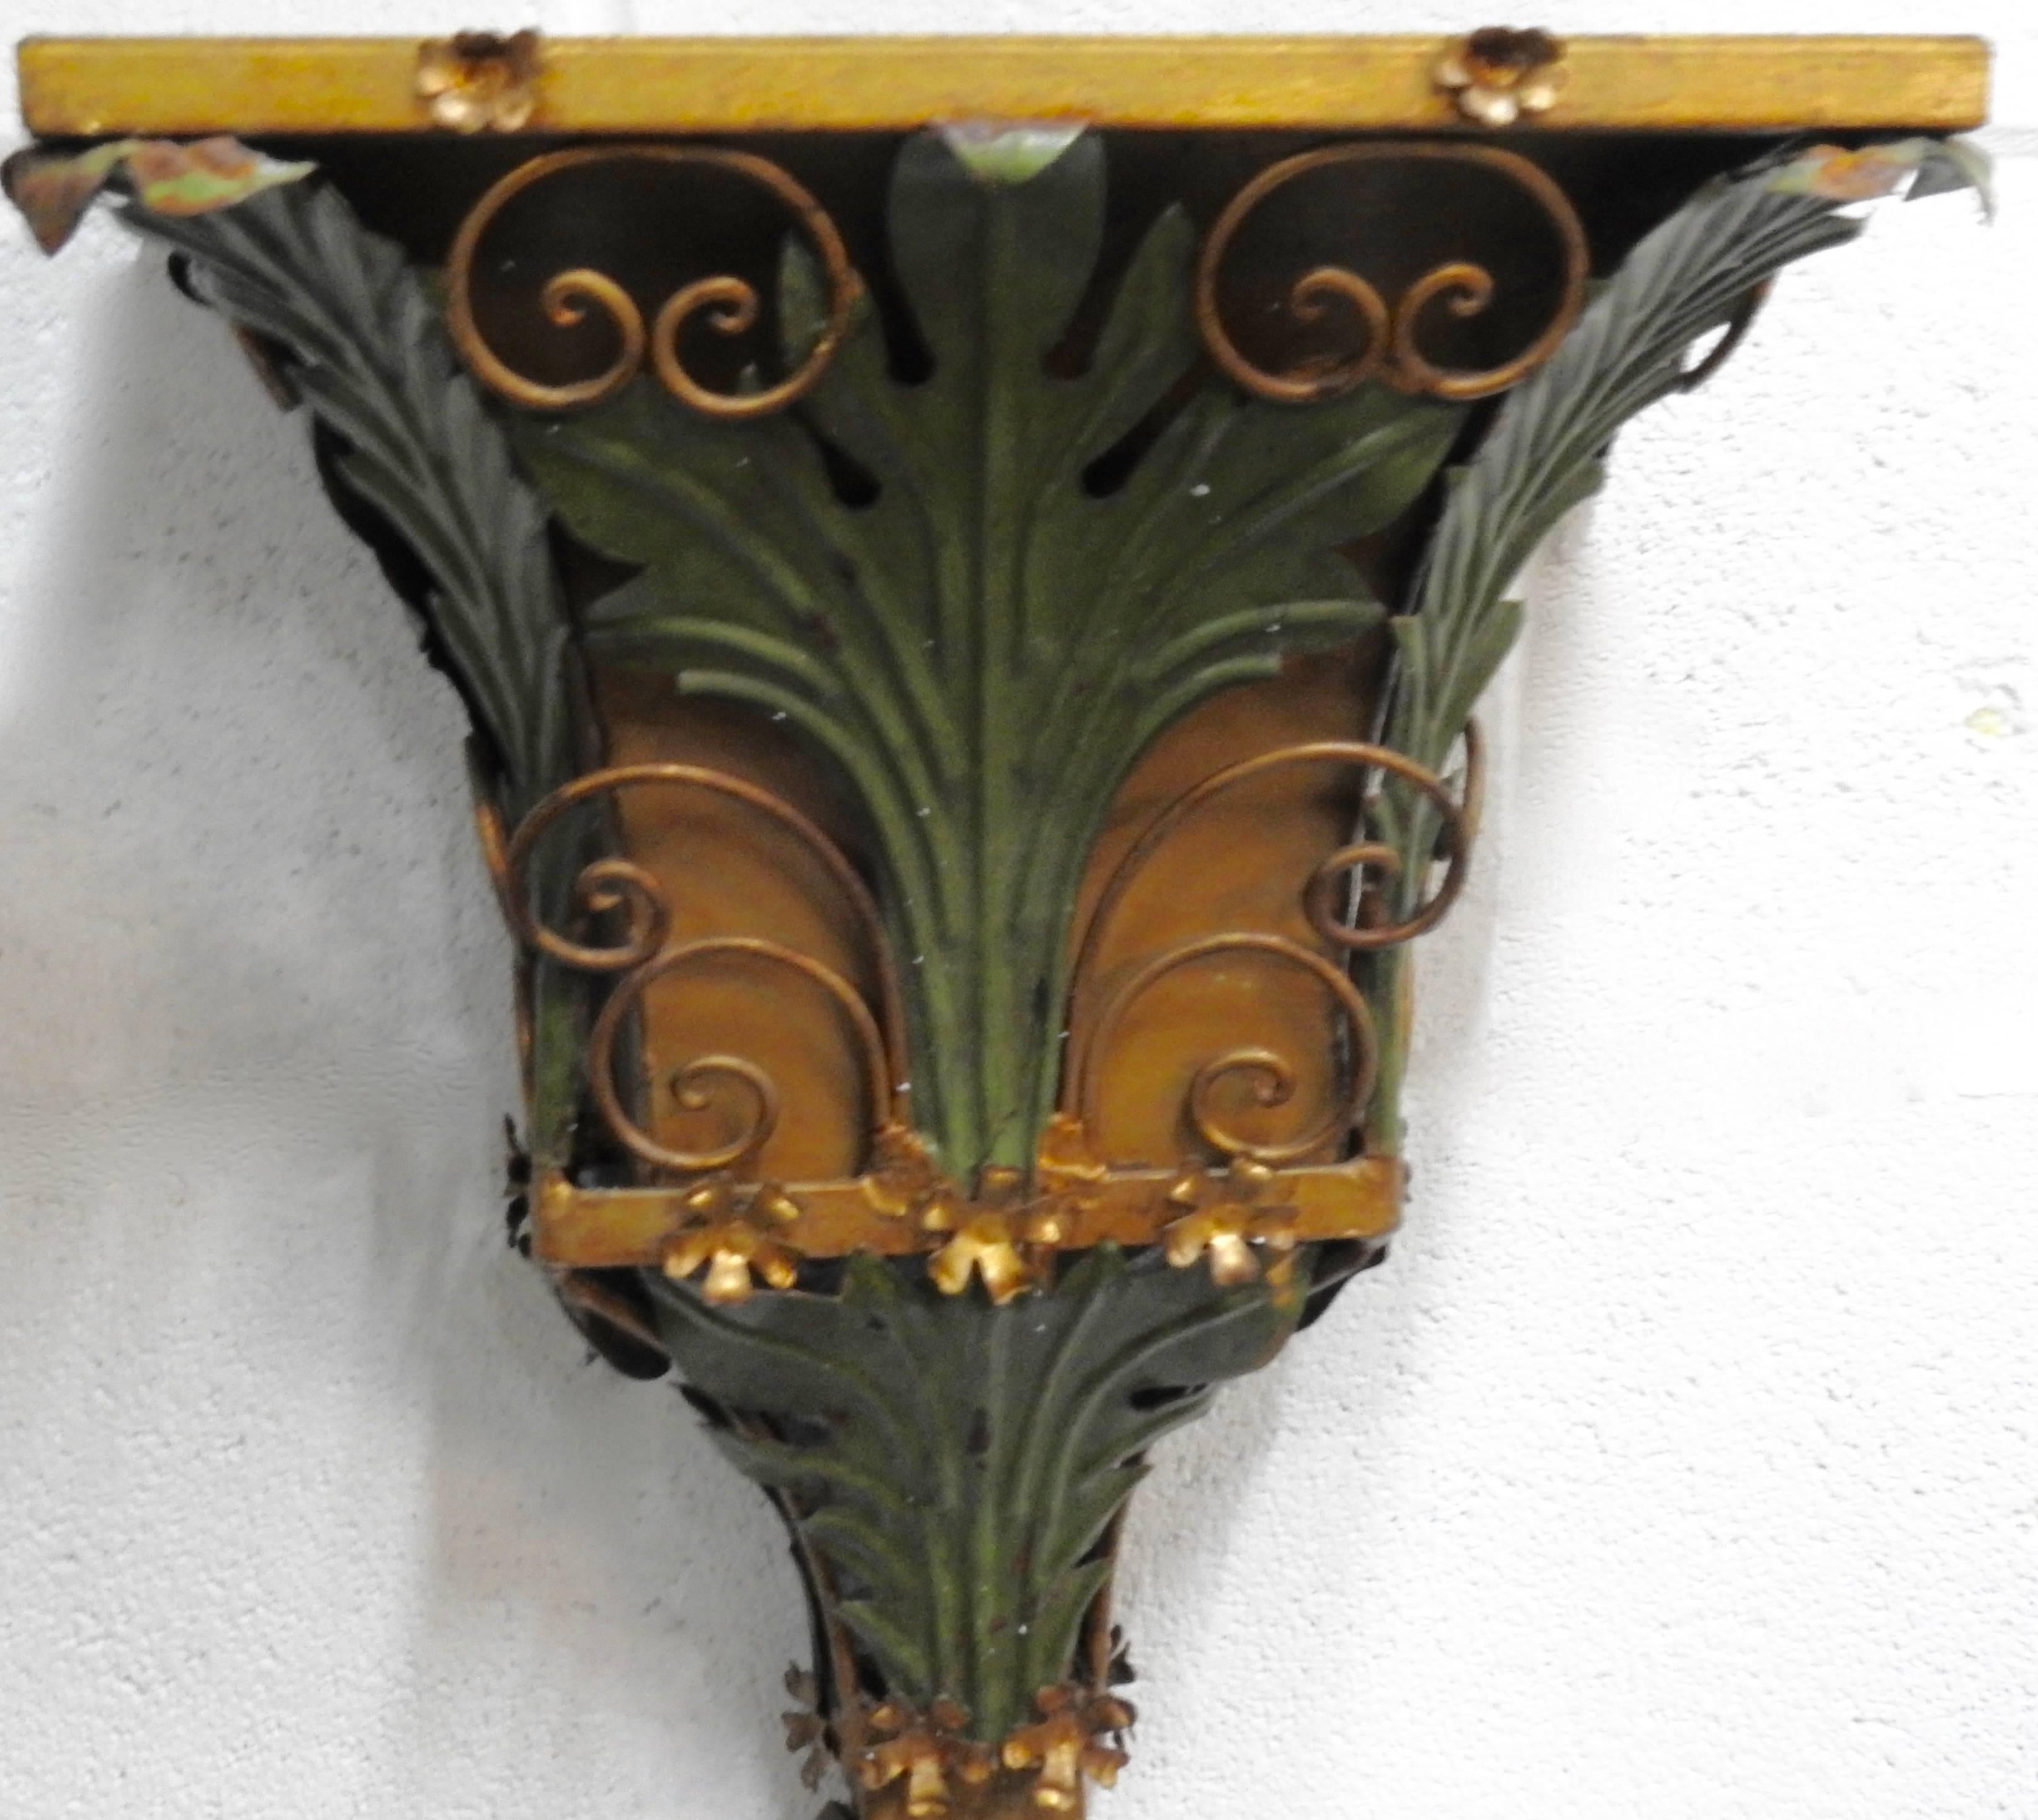 Leaves, scrolls, vines and flowers embellish this metal planter from Italy. Most of the surface is finished in a patinated gold and the leaves are in green. The top will hold your choice of greenery.